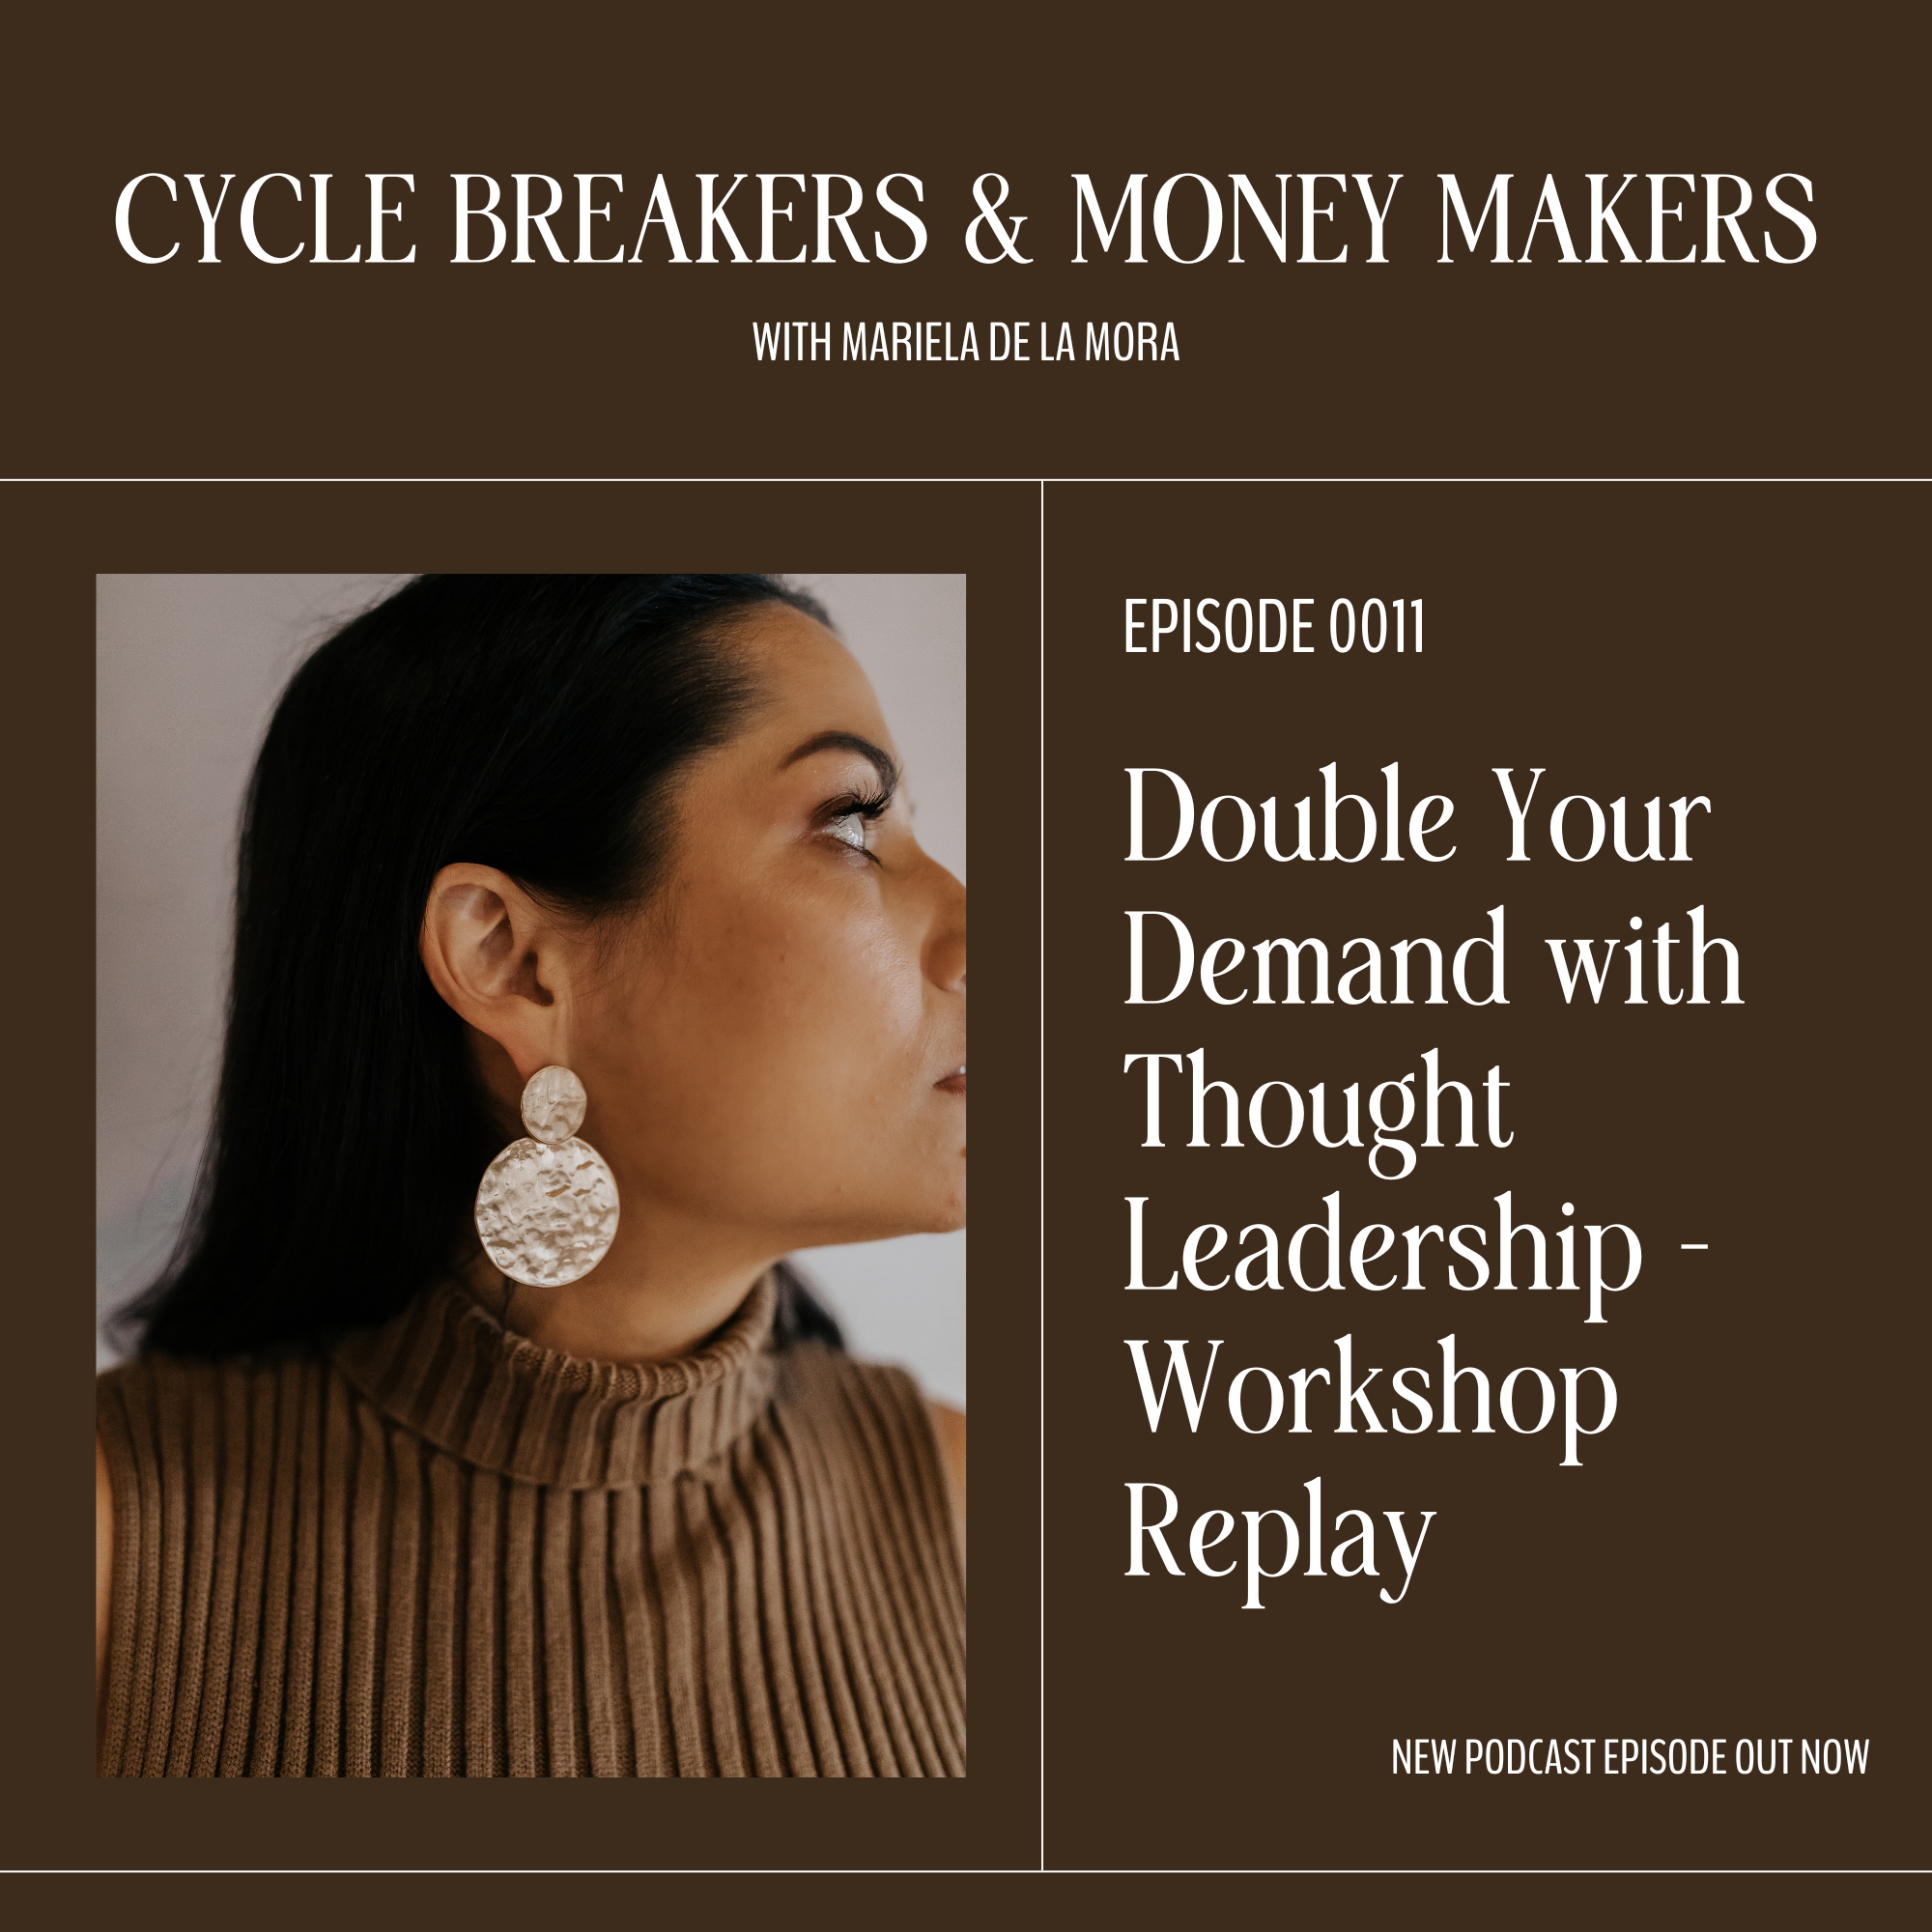 Double Your Demand with Thought Leadership - Workshop Replay